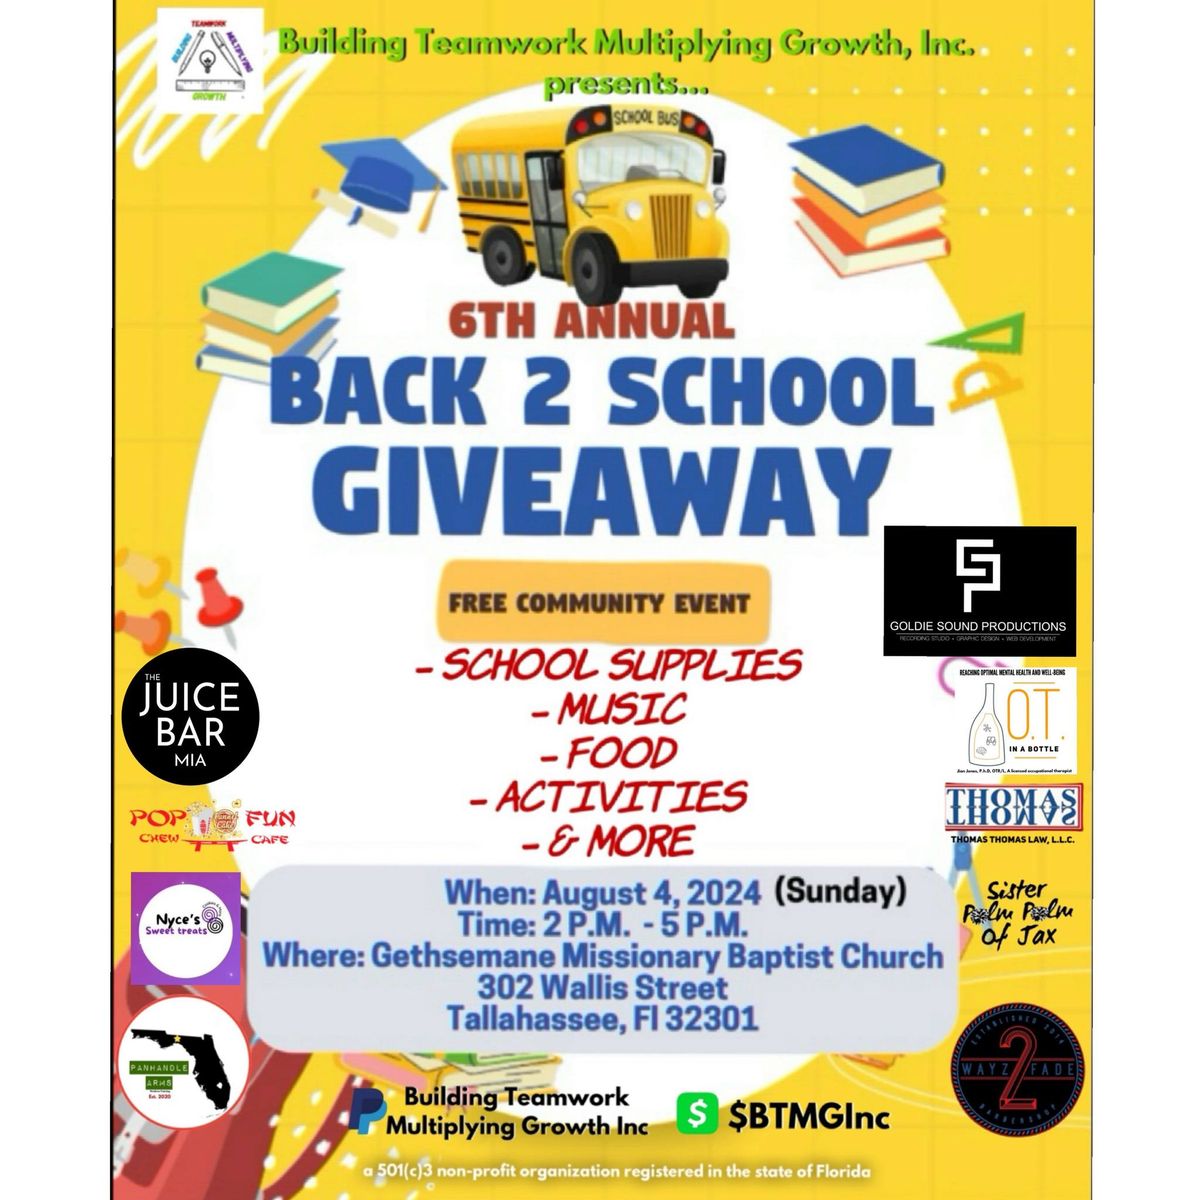 Building Teamwork Multiplying Growth, Inc. 6th Annual Back 2 School Giveaway 